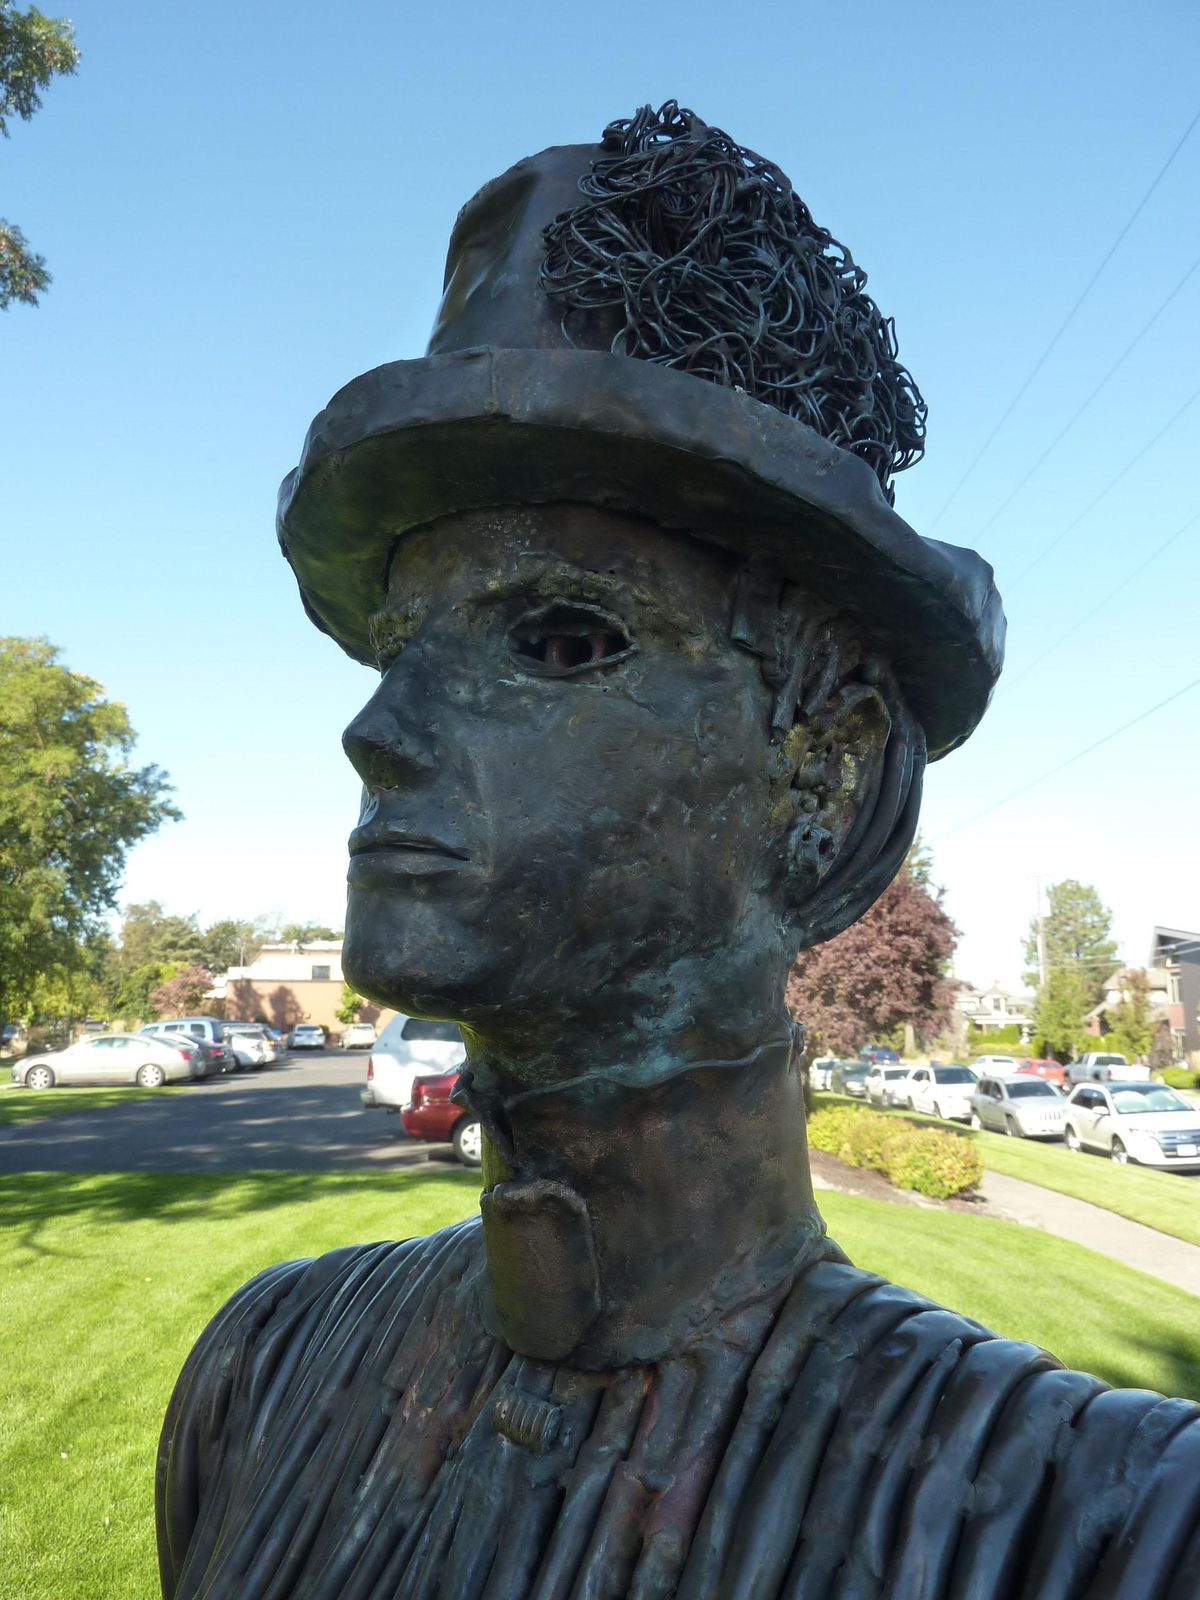 In August 2014, someone removed the head of Anna Browne’s statue. When it was retrieved and repaired, reinforced pipe had to be added, which extended the length of the neck. (Stefanie Pettit / The Spokesman-Review)